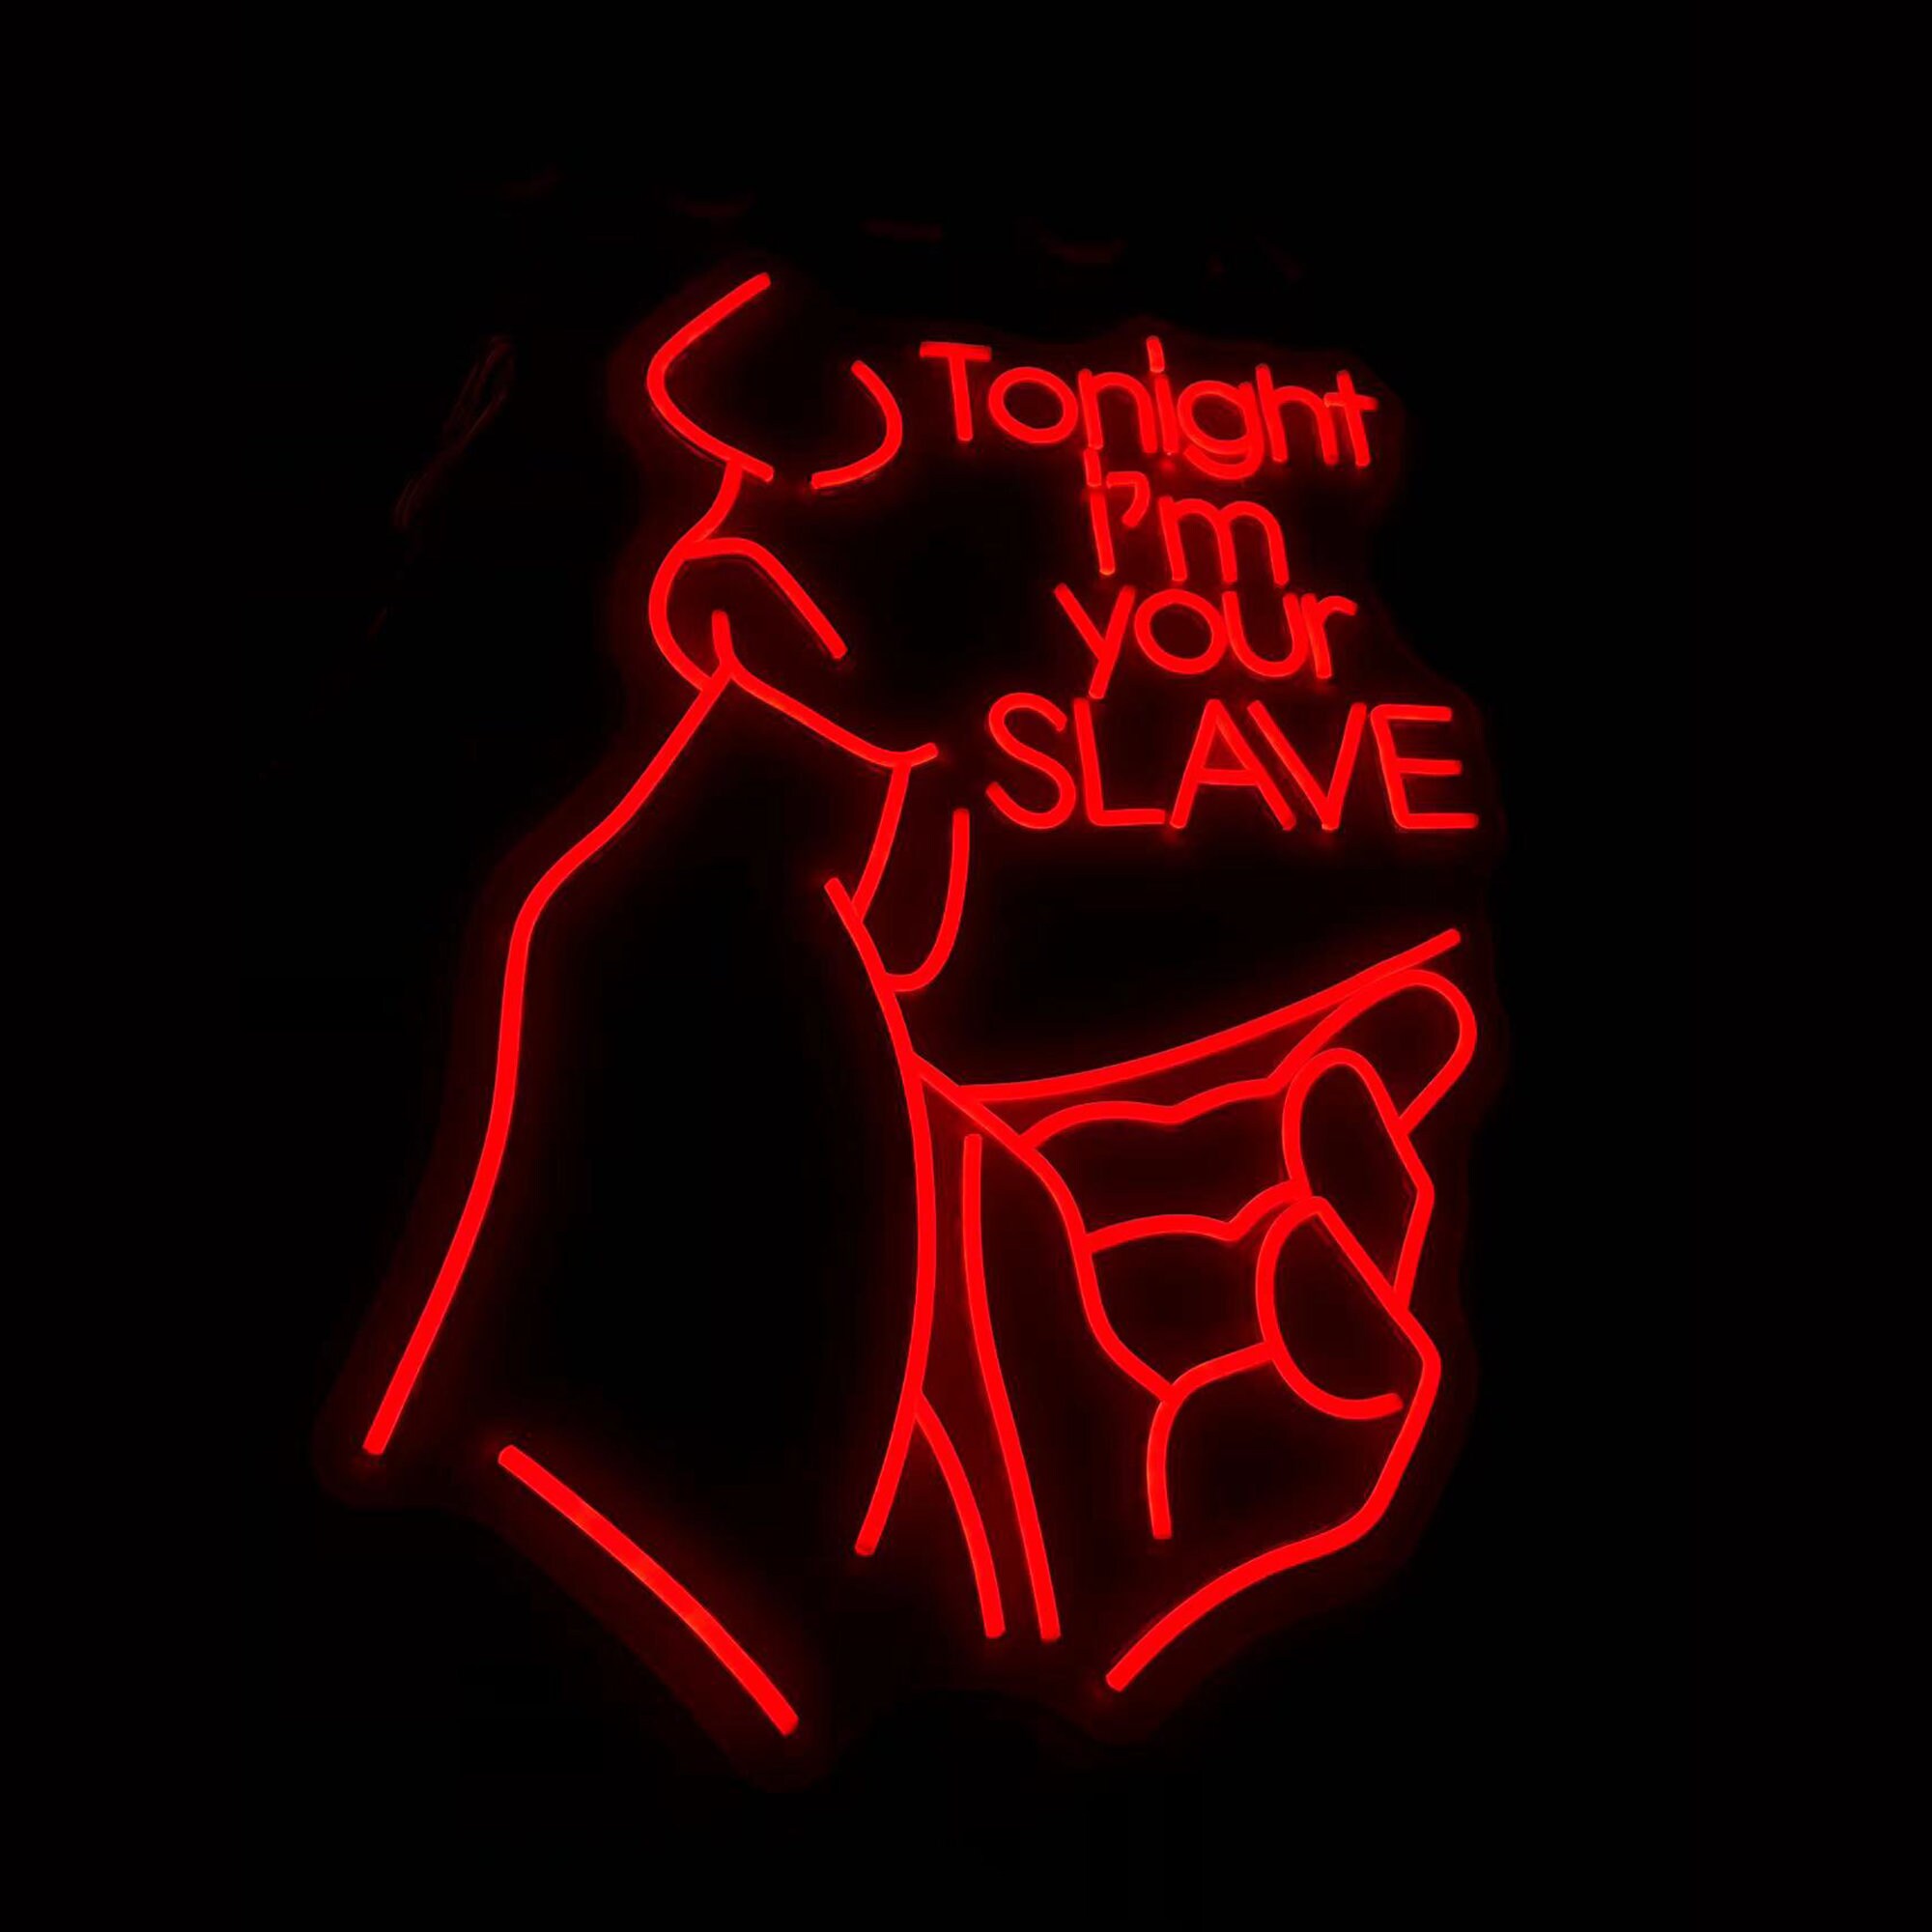 180019 XXX DVD Adult Store Toys Shop Display LED Light Neon Sign